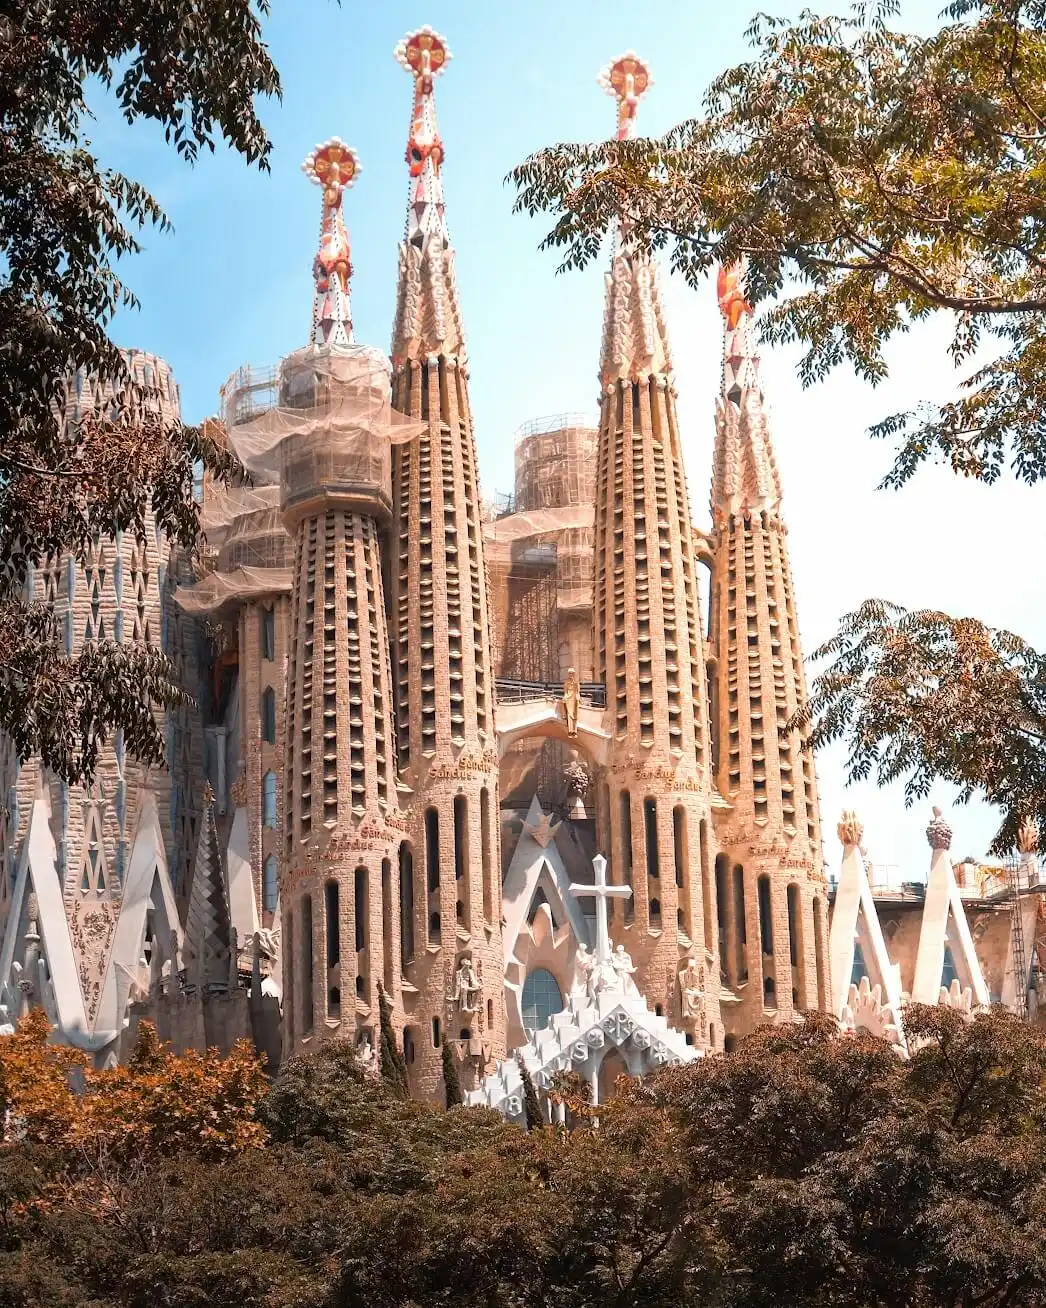 View at the towers of Sagrada Familia in Barcelona